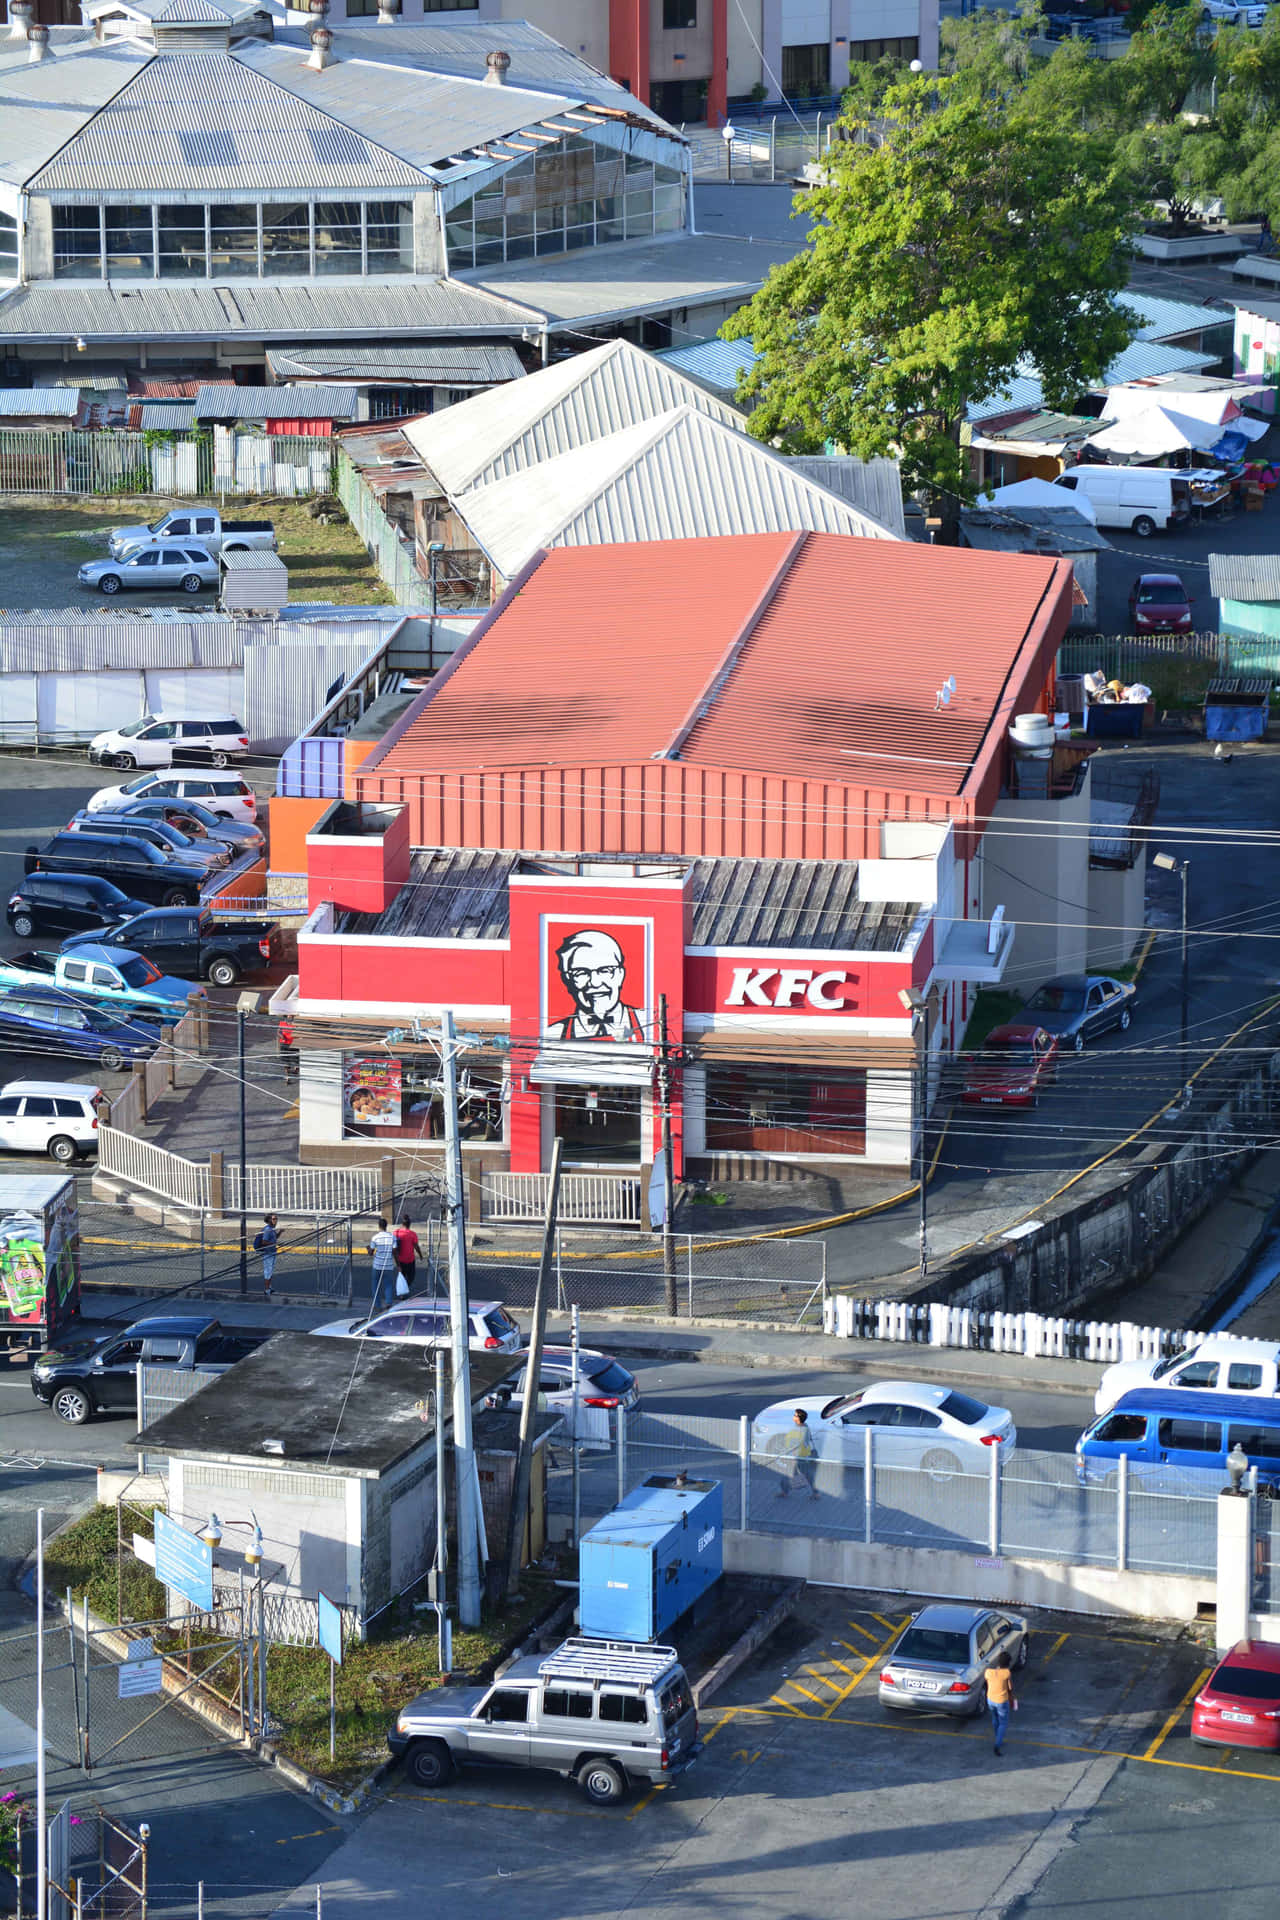 A Kfc Restaurant In The Middle Of A City